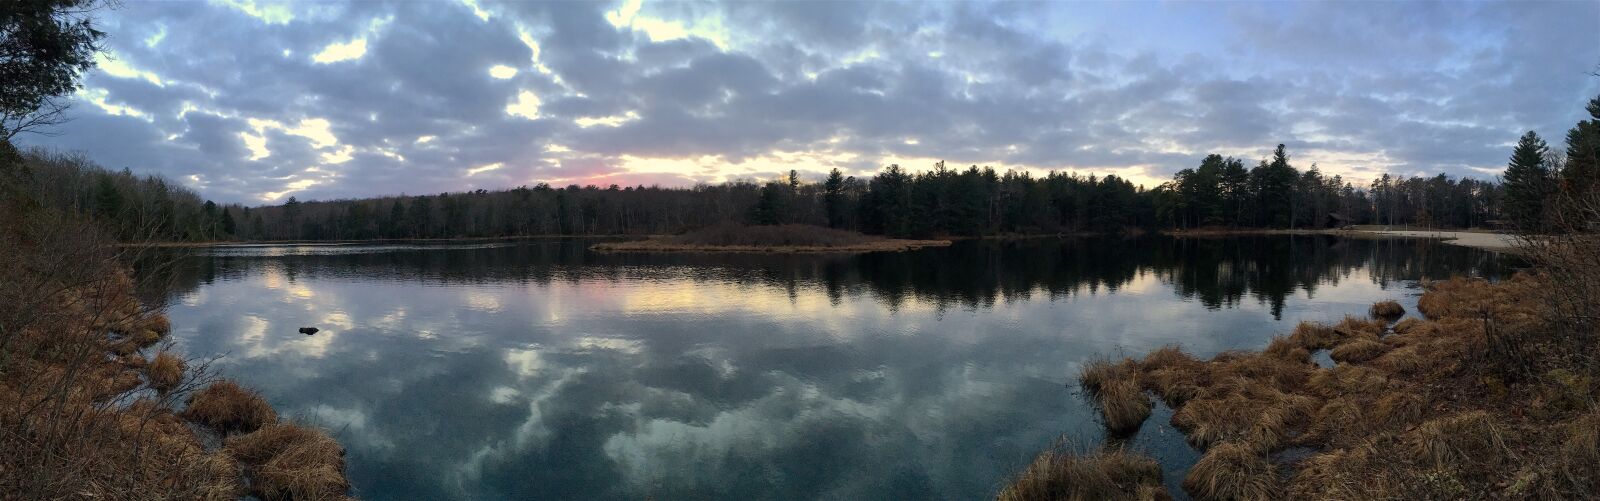 Apple iPhone 6s sample photo. Lake, sunset, clouds photography